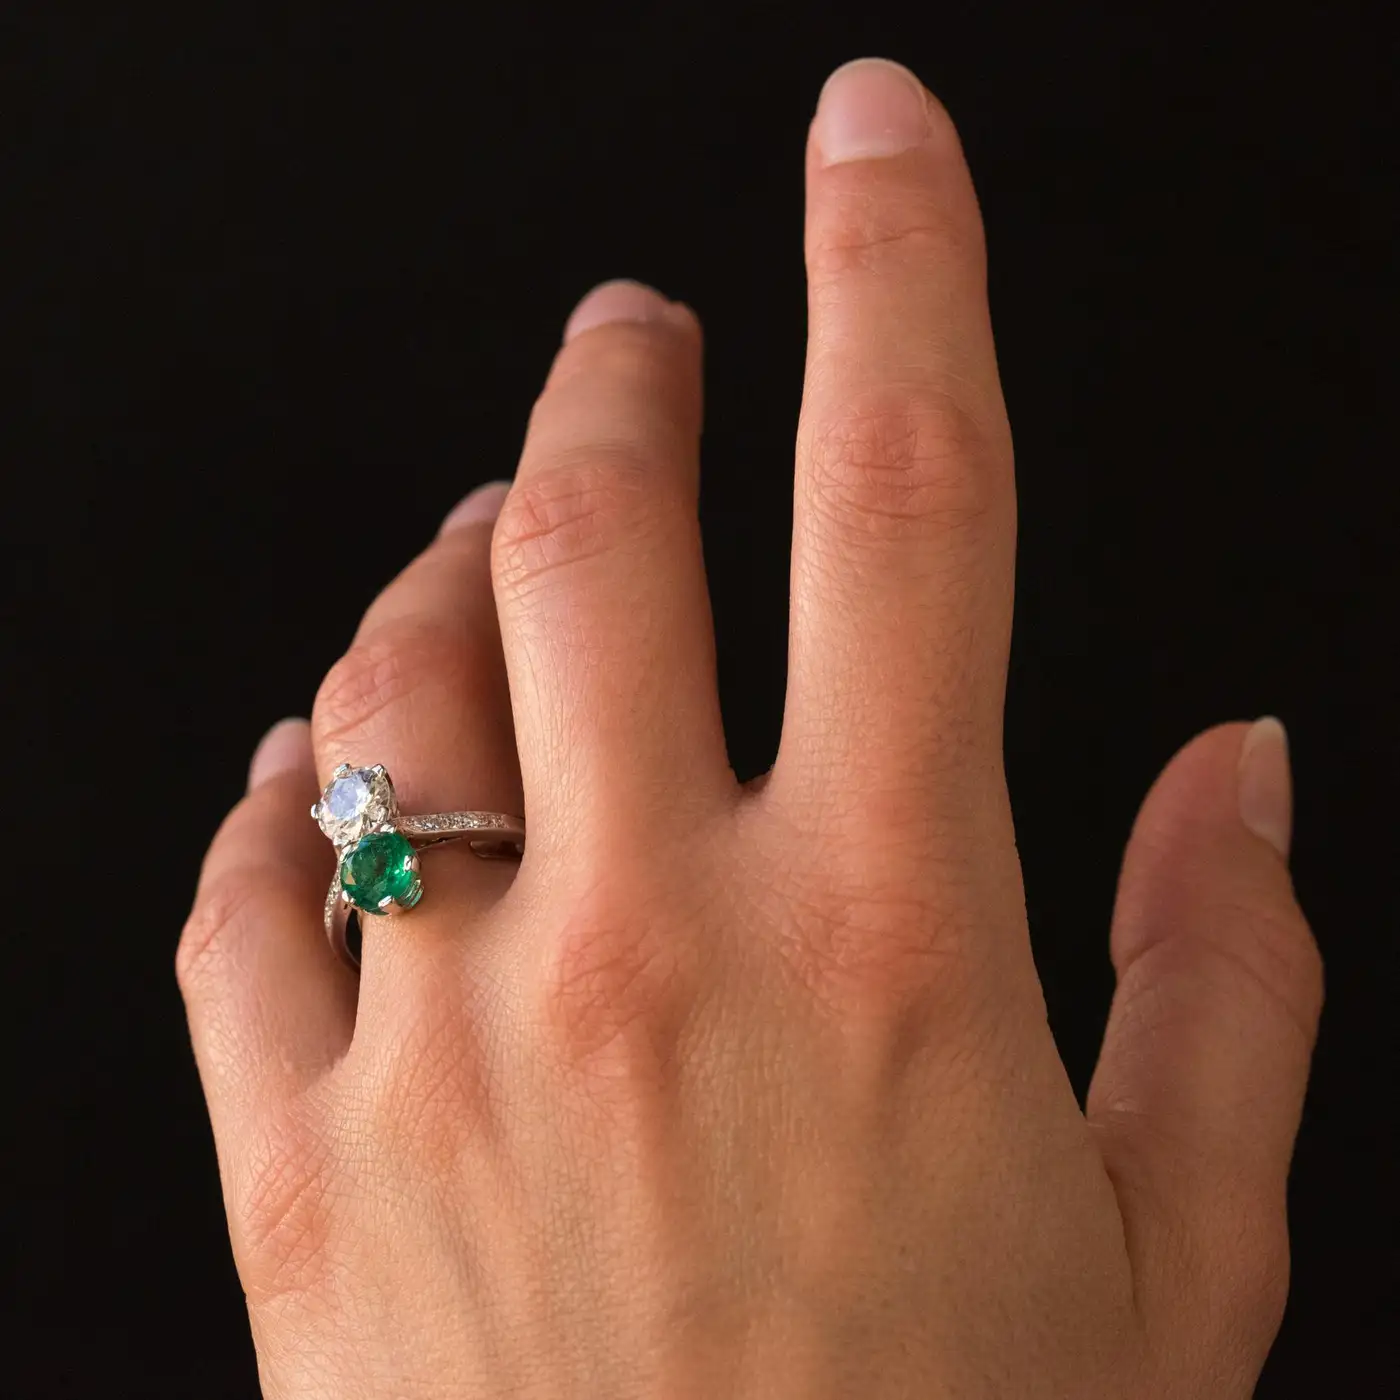 1930s-French-Platinum-Art-Deco-Emerald-Diamond-You-and-Me-Ring-12.webp